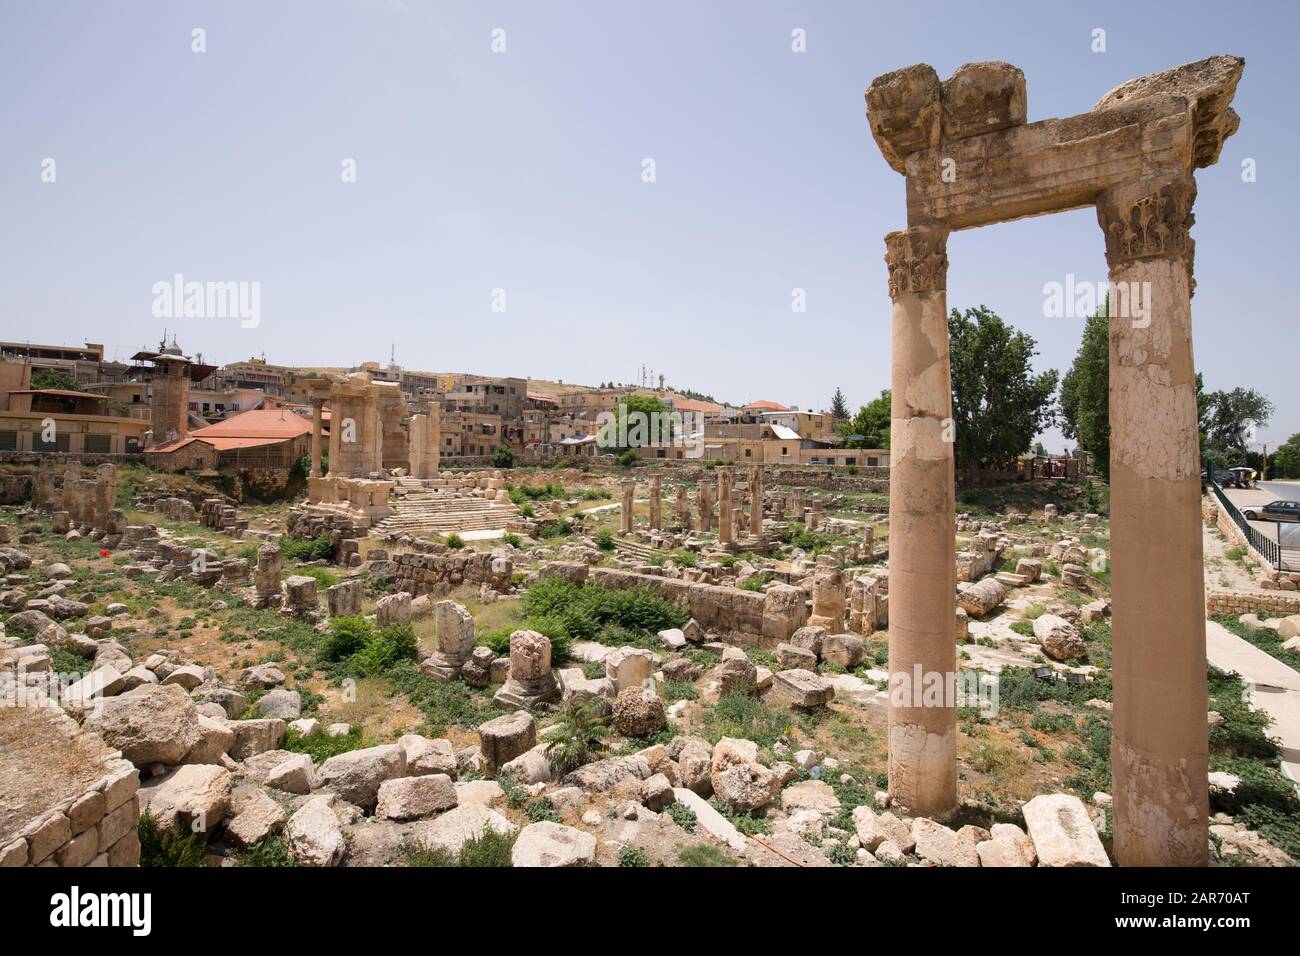 Colonnaded street, Temple of Venus and Temple of the Muses. The ruins of the Roman city of Heliopolis or Baalbek in the Beqaa Valley. Baalbek, Lebanon Stock Photo